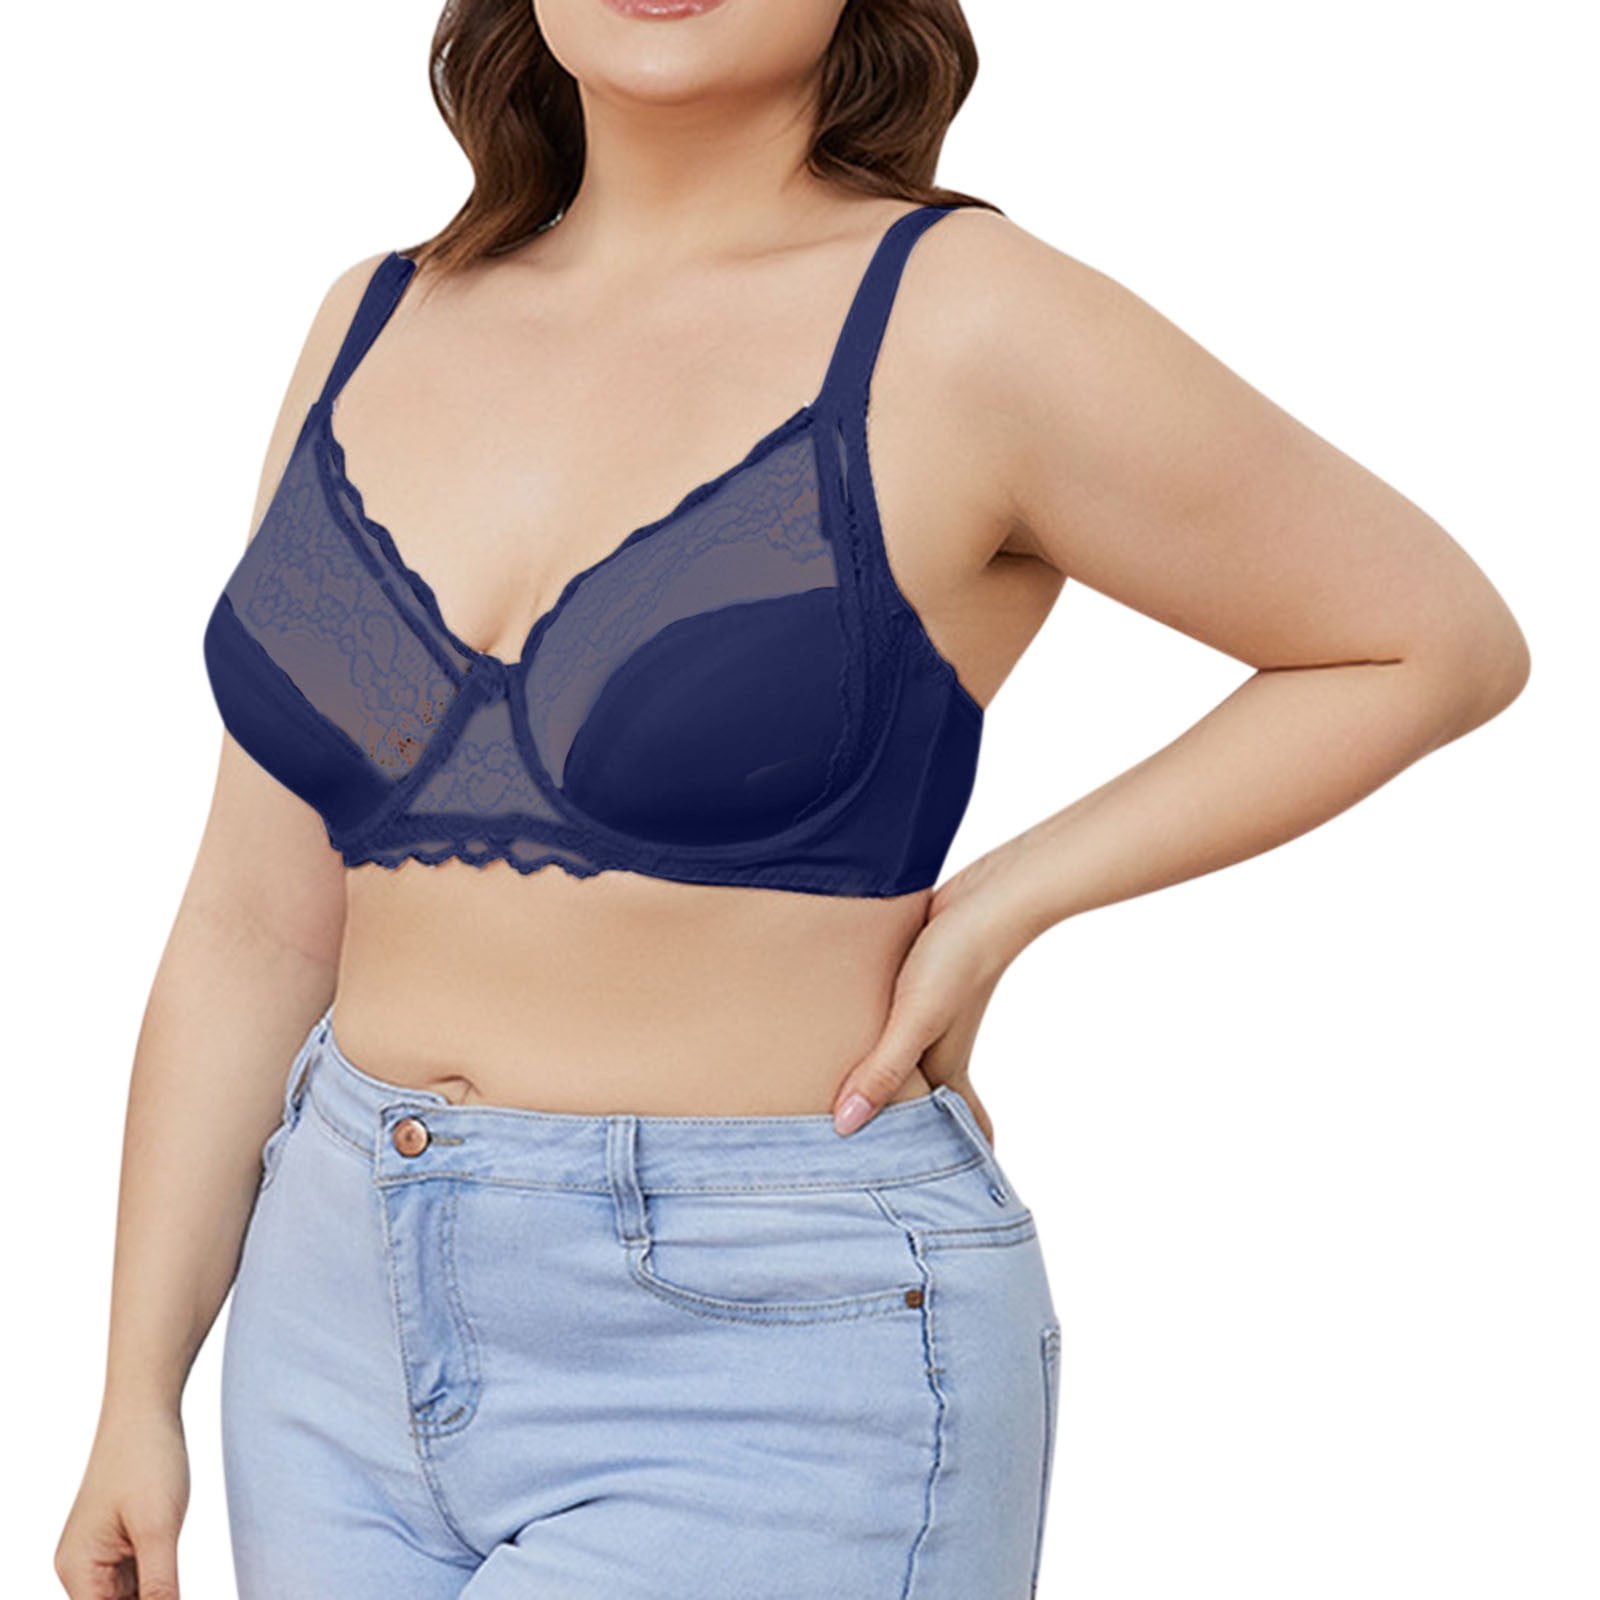 LEEy-World Plus Size Lingerie Compression Wirefree High Support Bra for  Women S to Plus Size Everyday Wear, Exercise and Offers Back Support  Beige,85 